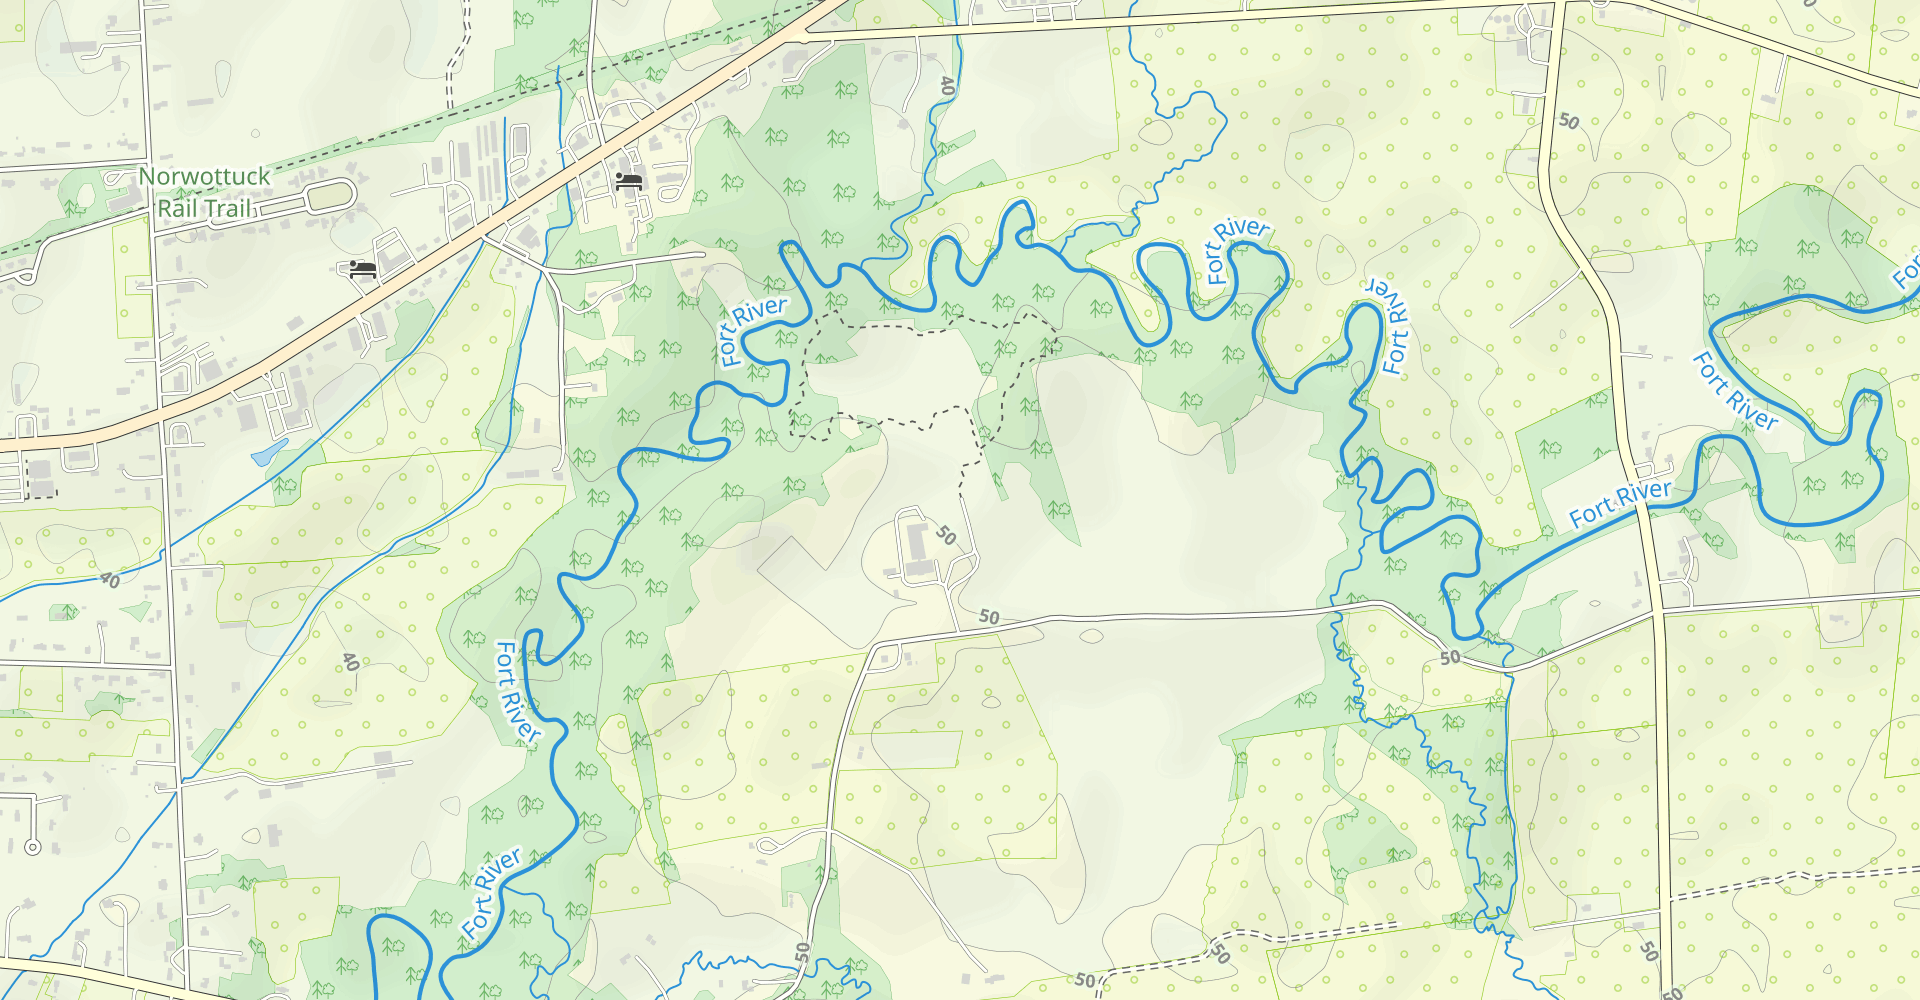 Fort River Birding and Nature Trail